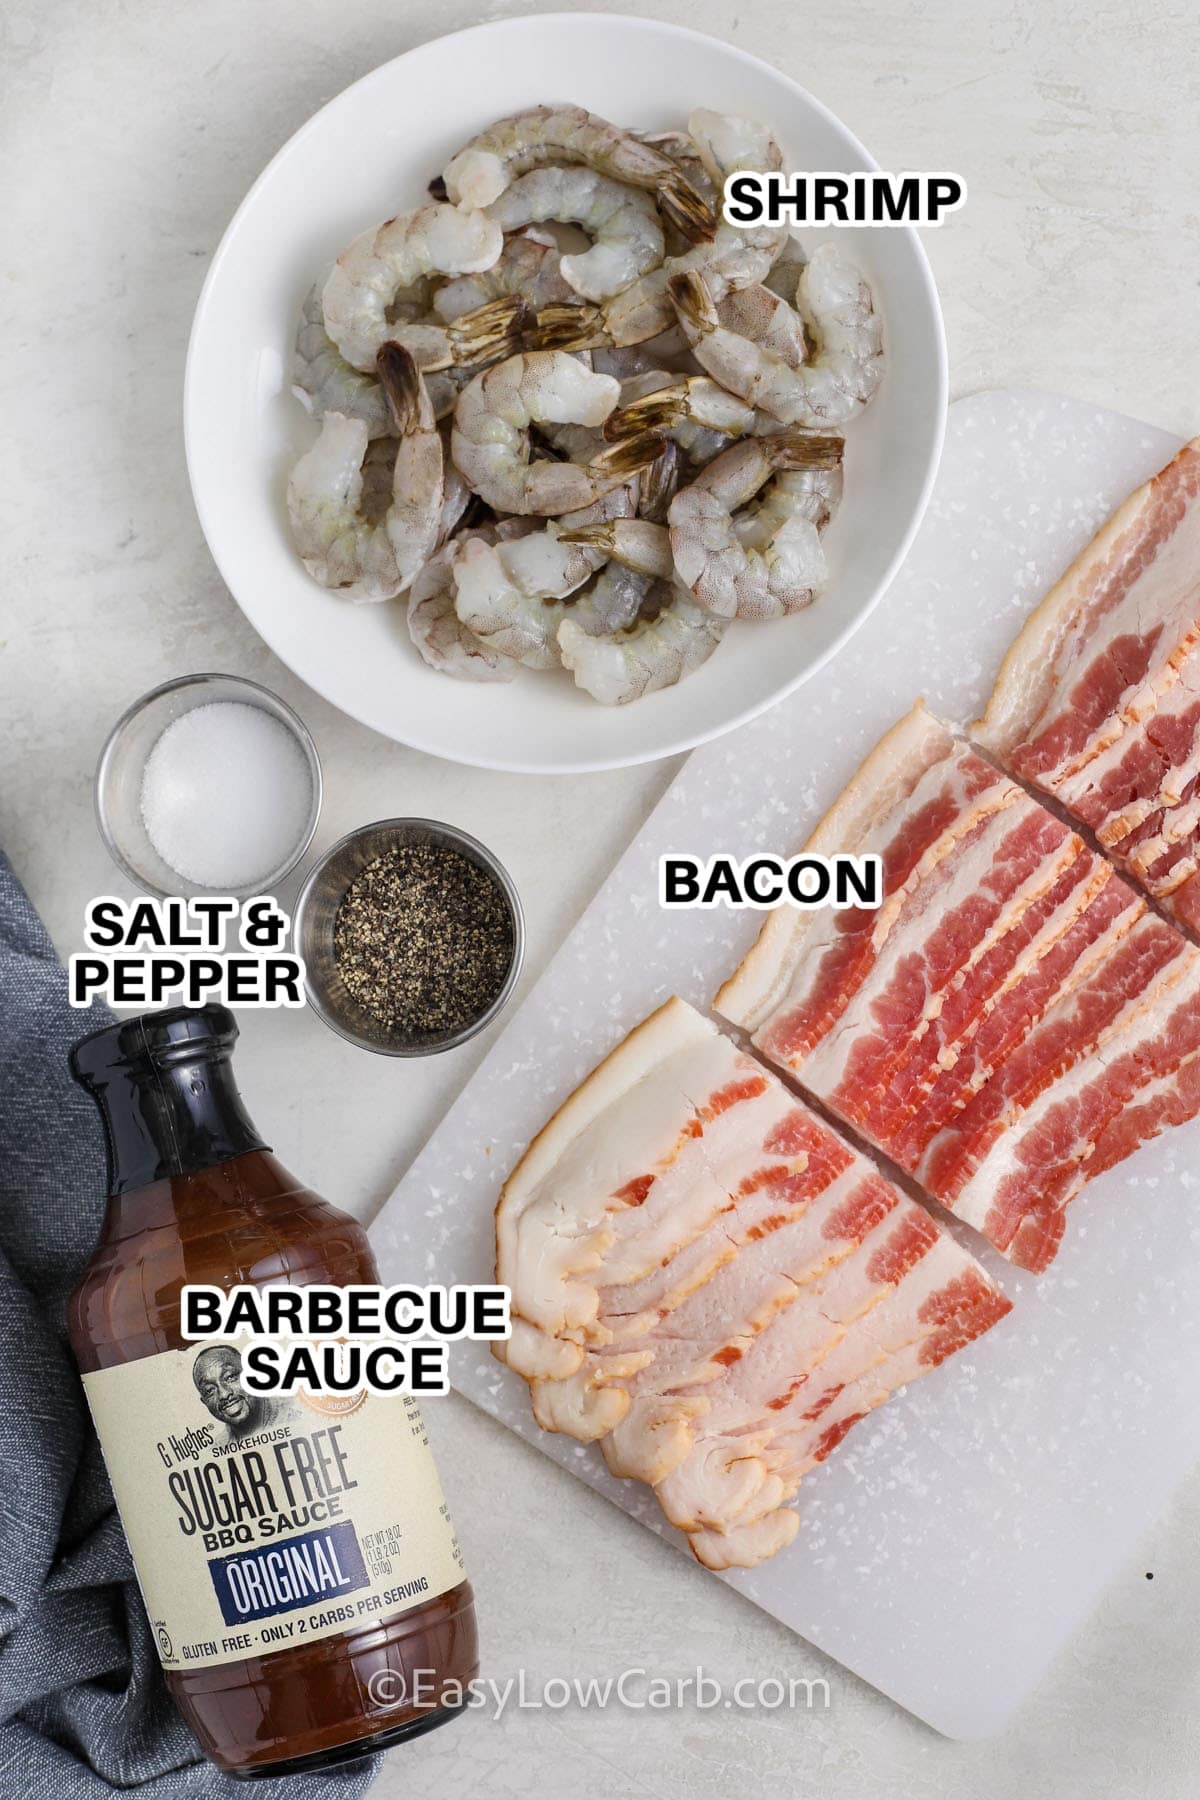 Ingredients to make Bacon Wrapped Shrimp labeled: Shrimp, Salt & Pepper, Bacon, and Barbecue Sauce